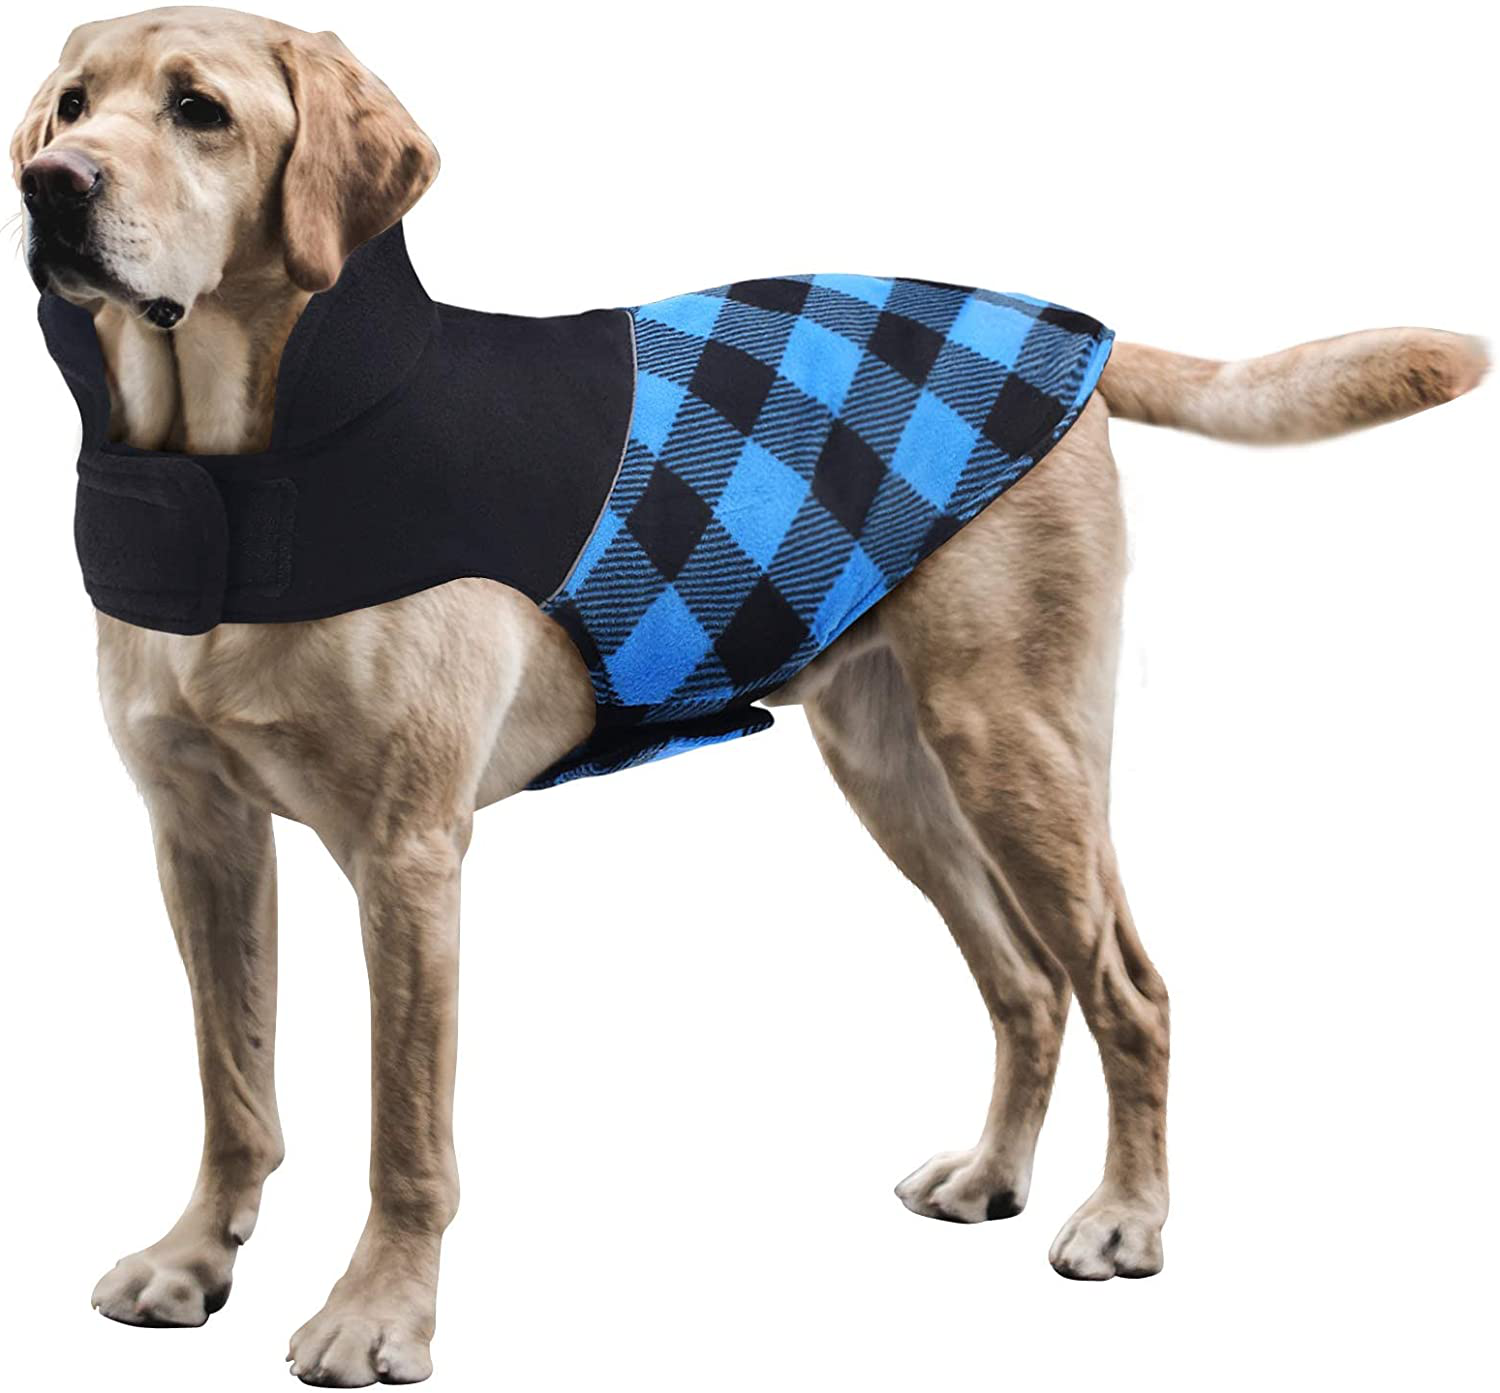 ASENKU Dog Winter Coat, Reversible Plaid Pet Jacket, Waterproof Windproof Reflective Puppy Clothes for Cold Weather, Comfortable Outdoor & Indoor Apparel, Warm Cozy Vest for Small Medium Large Dogs Animals & Pet Supplies > Pet Supplies > Dog Supplies > Dog Apparel ASENKU Blue M: Chest Girth (16.93"-20.87") 